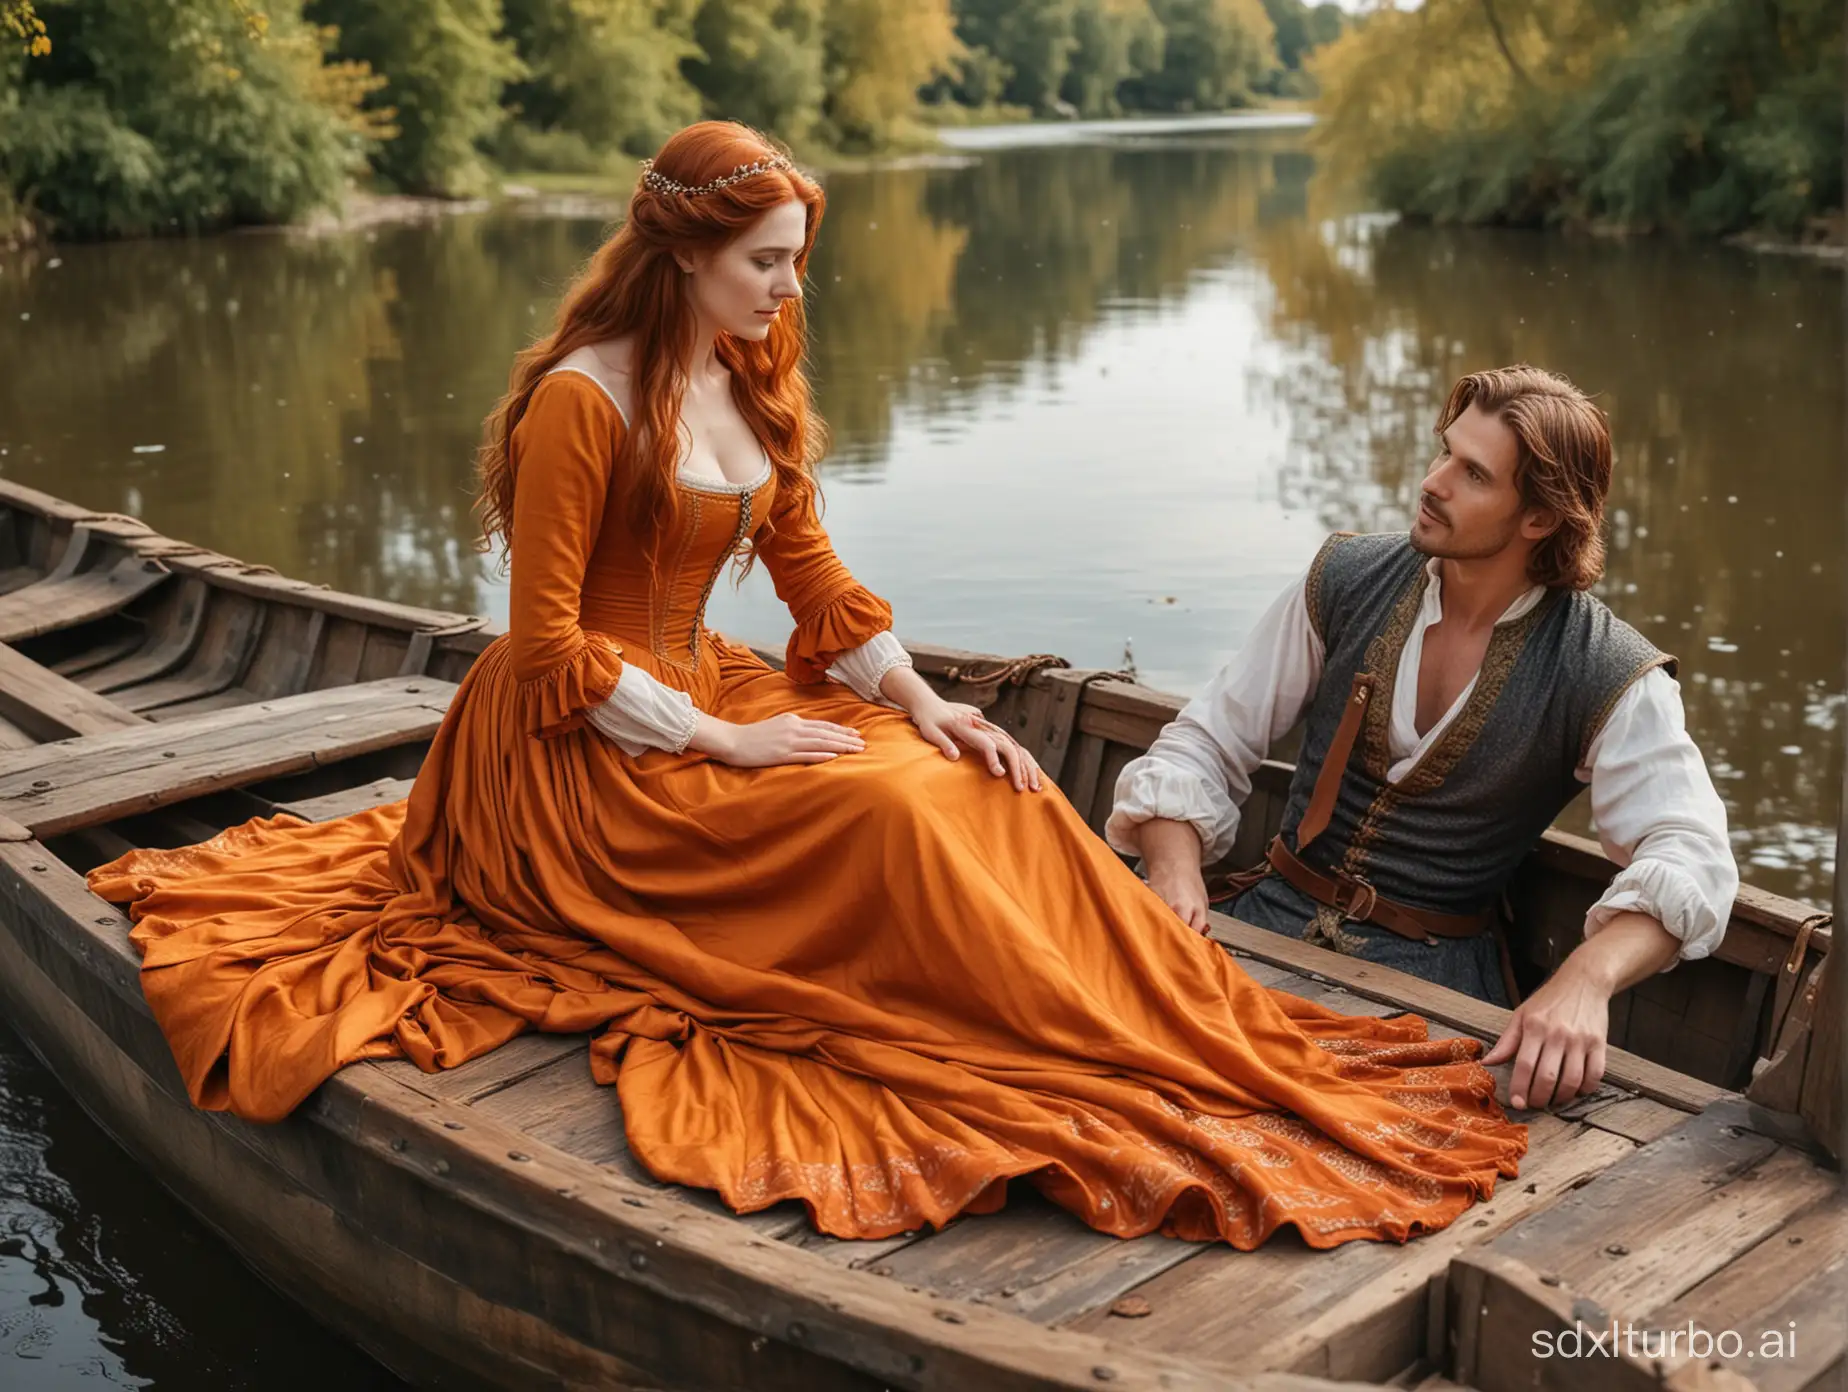 A handsome guy in his thirties with long brown hair in a beautiful medieval costume sits on an overturned boat by the river and looks at a red-haired girl in a medieval gorgeous orange dress with a large neckline, who has put her bare foot on the boat and is pushing back her wet hair